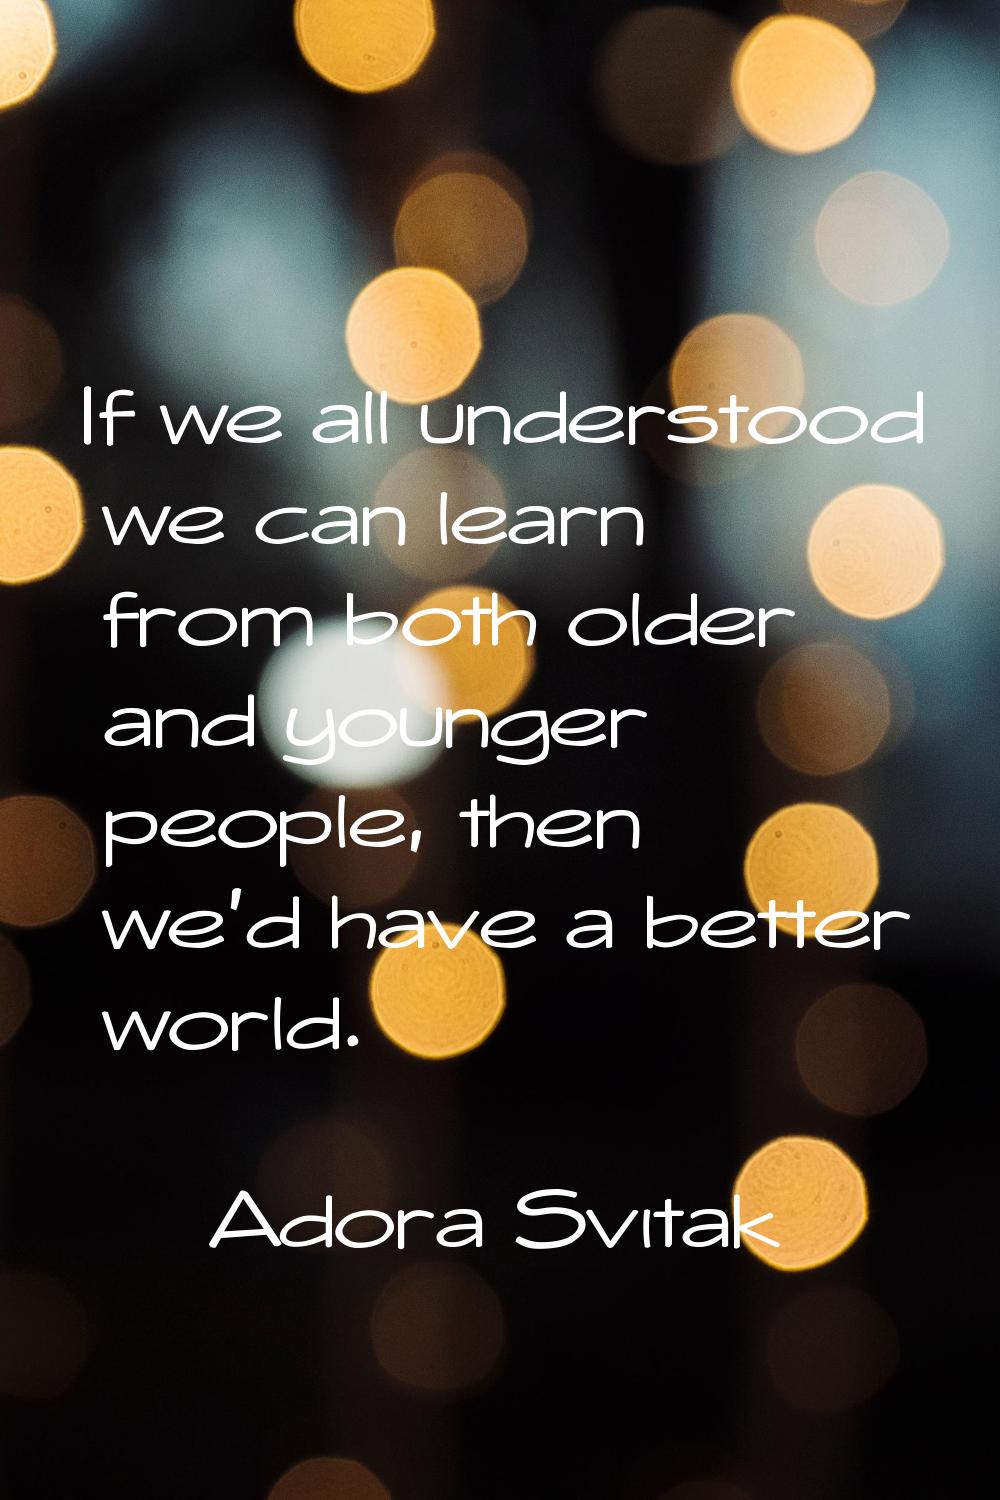 If we all understood we can learn from both older and younger people, then we'd have a better world